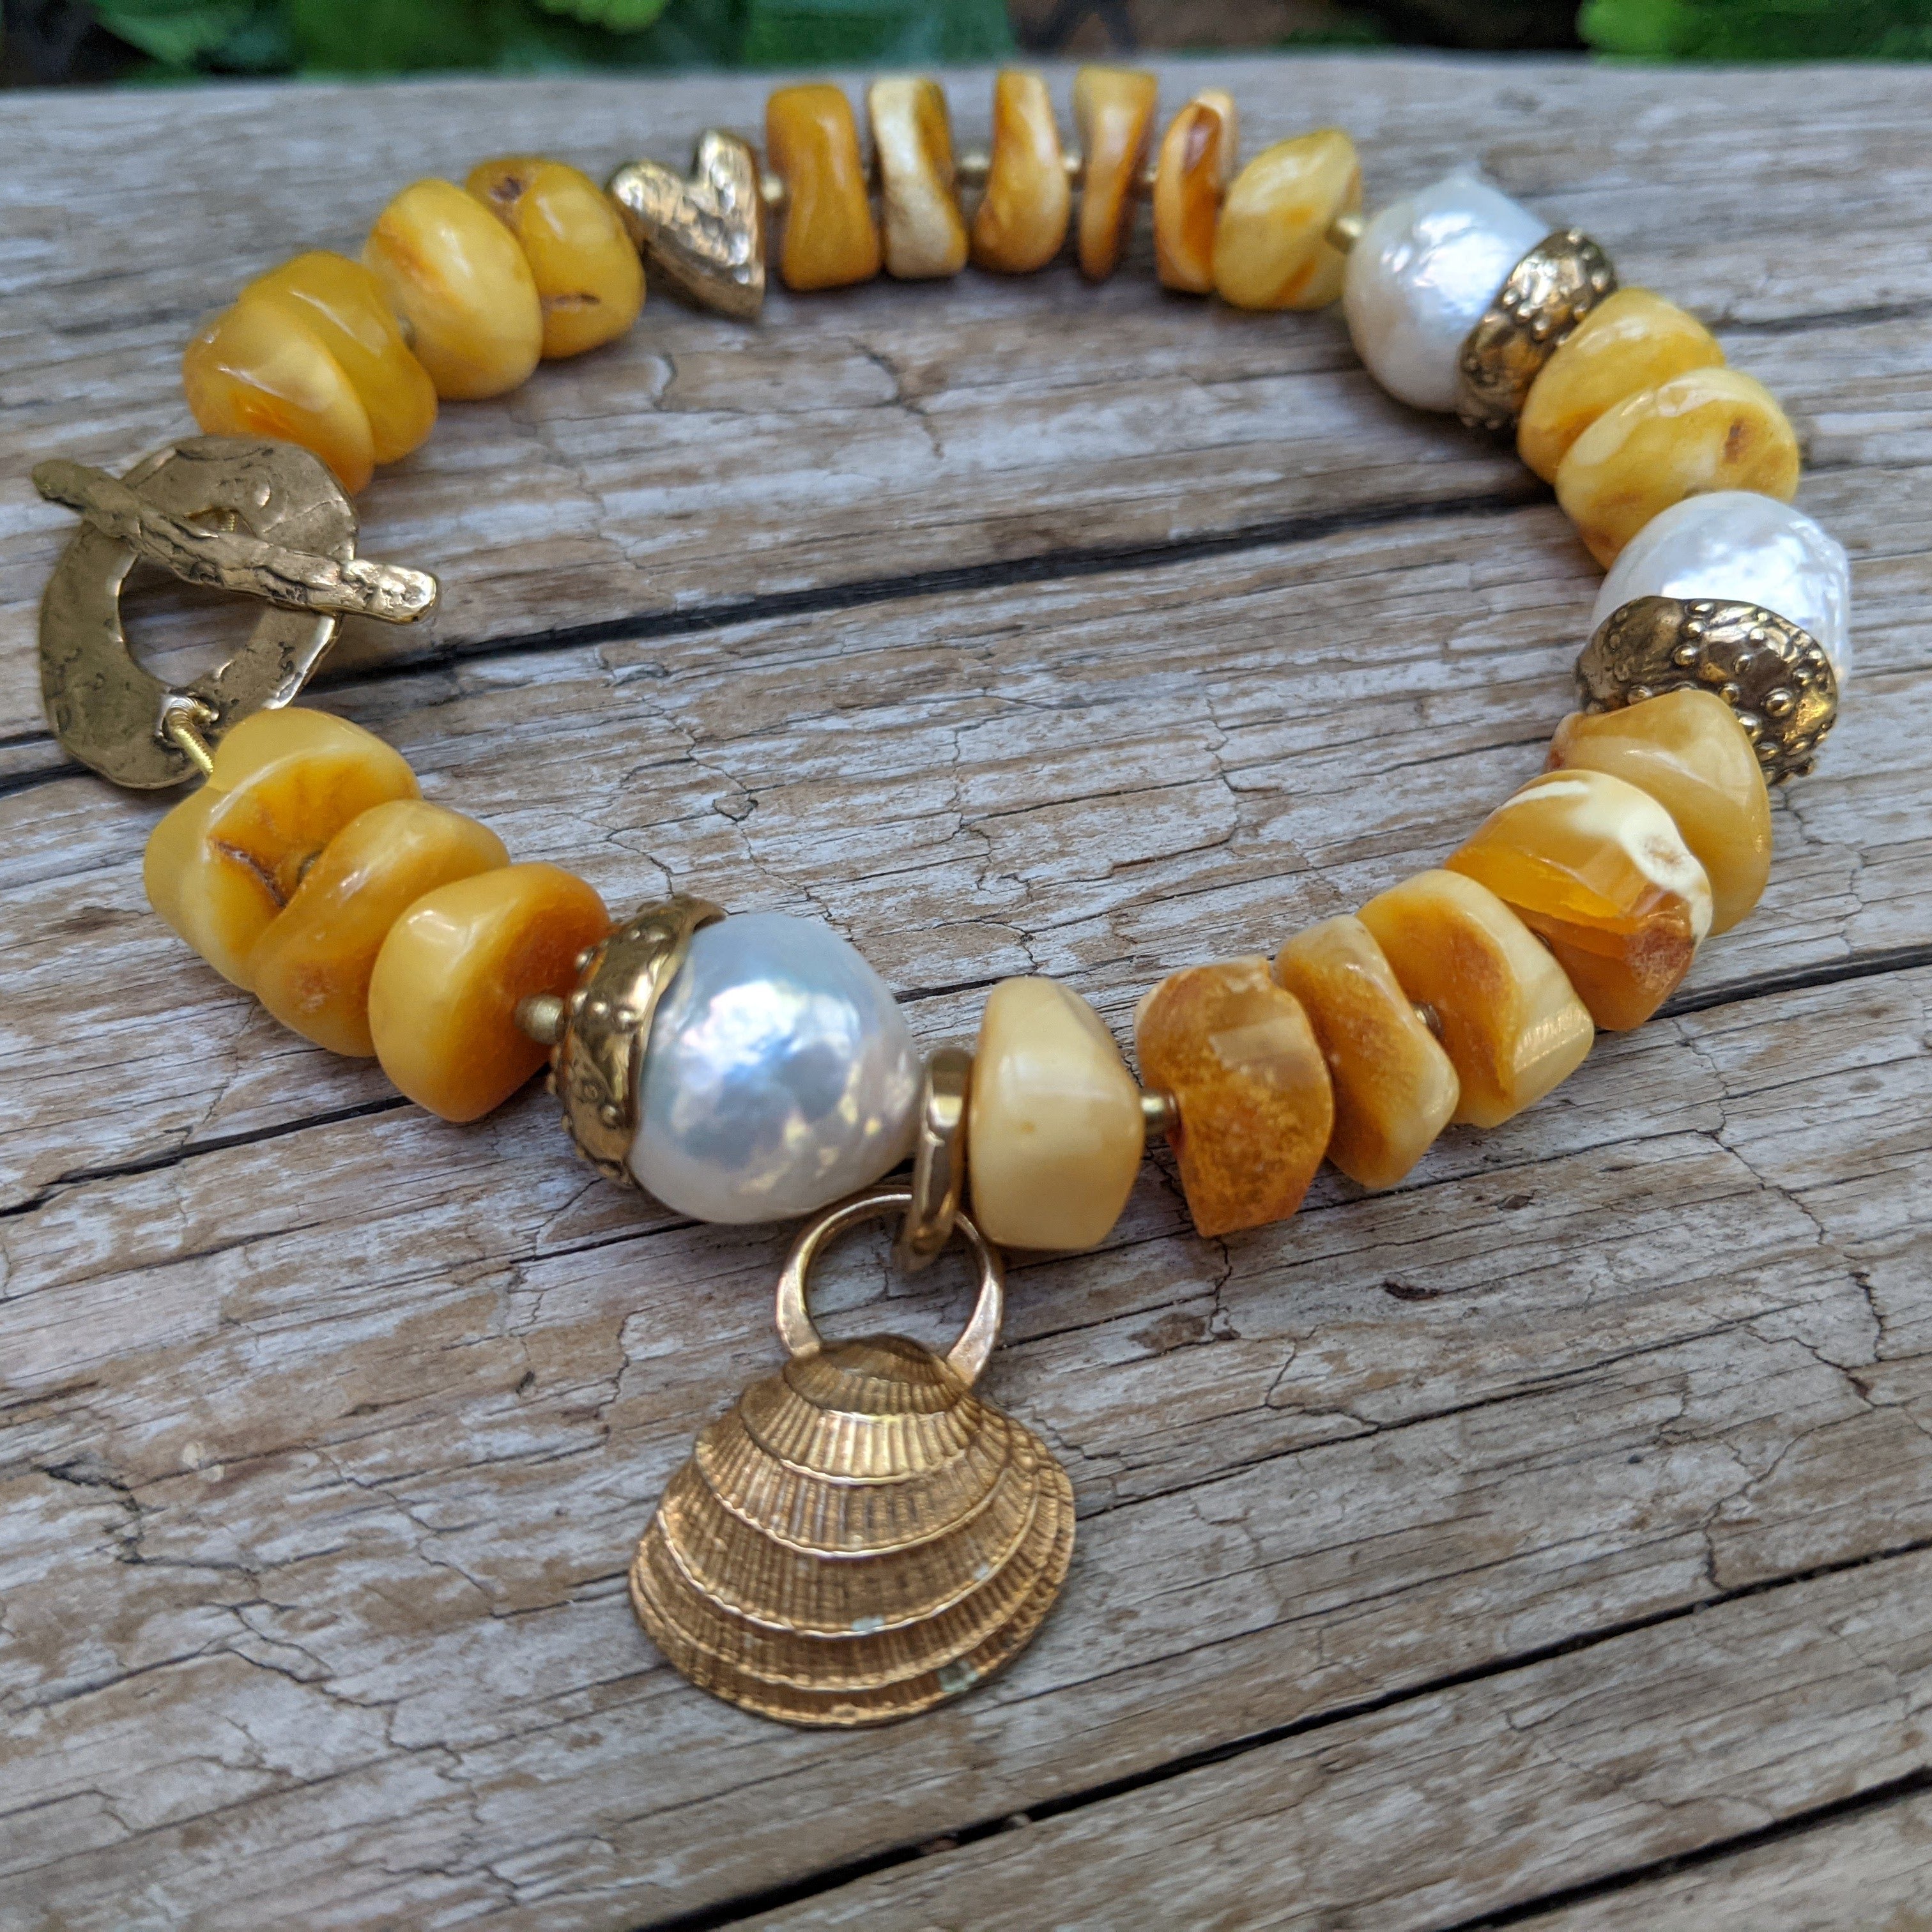 Statement Baltic amber bracelet with big white Edison pearl and artisan gold bronze shell handcrafted by Aurora Creative Jewellery.